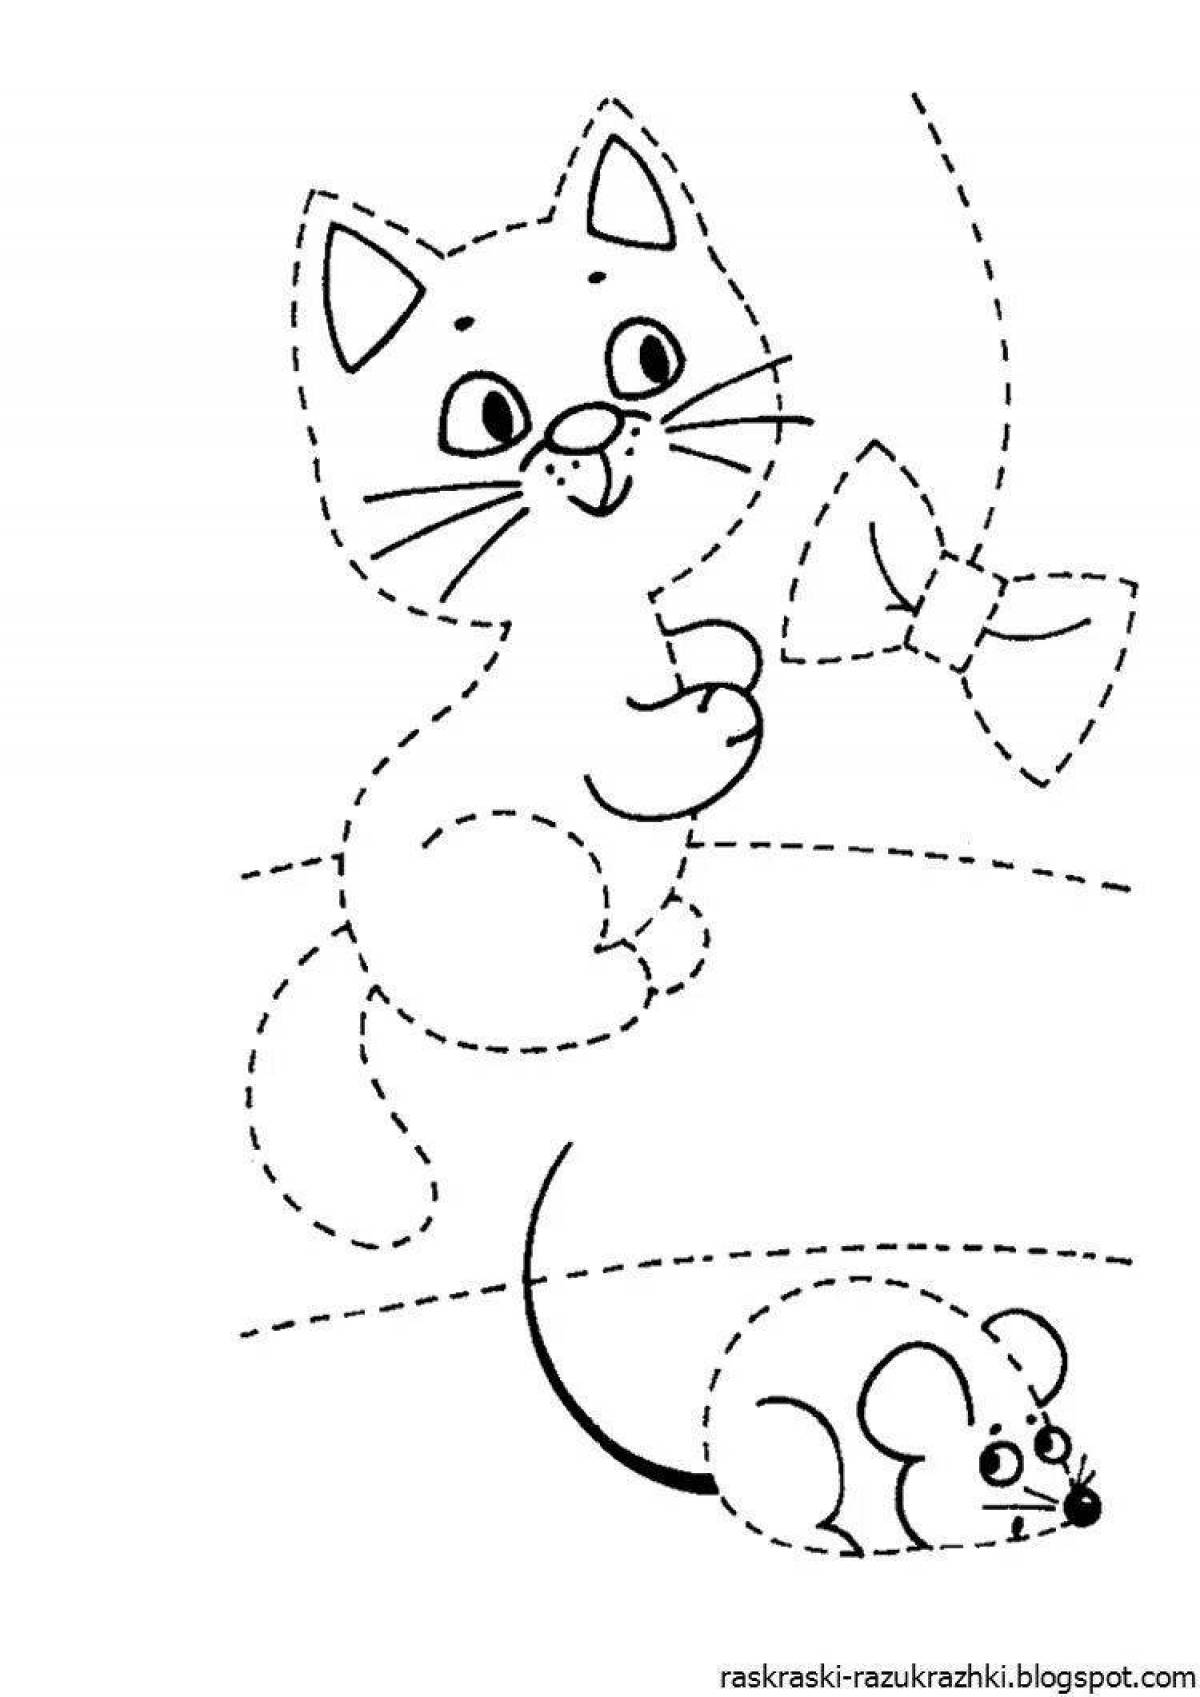 Smart cat coloring book for kids 4-5 years old